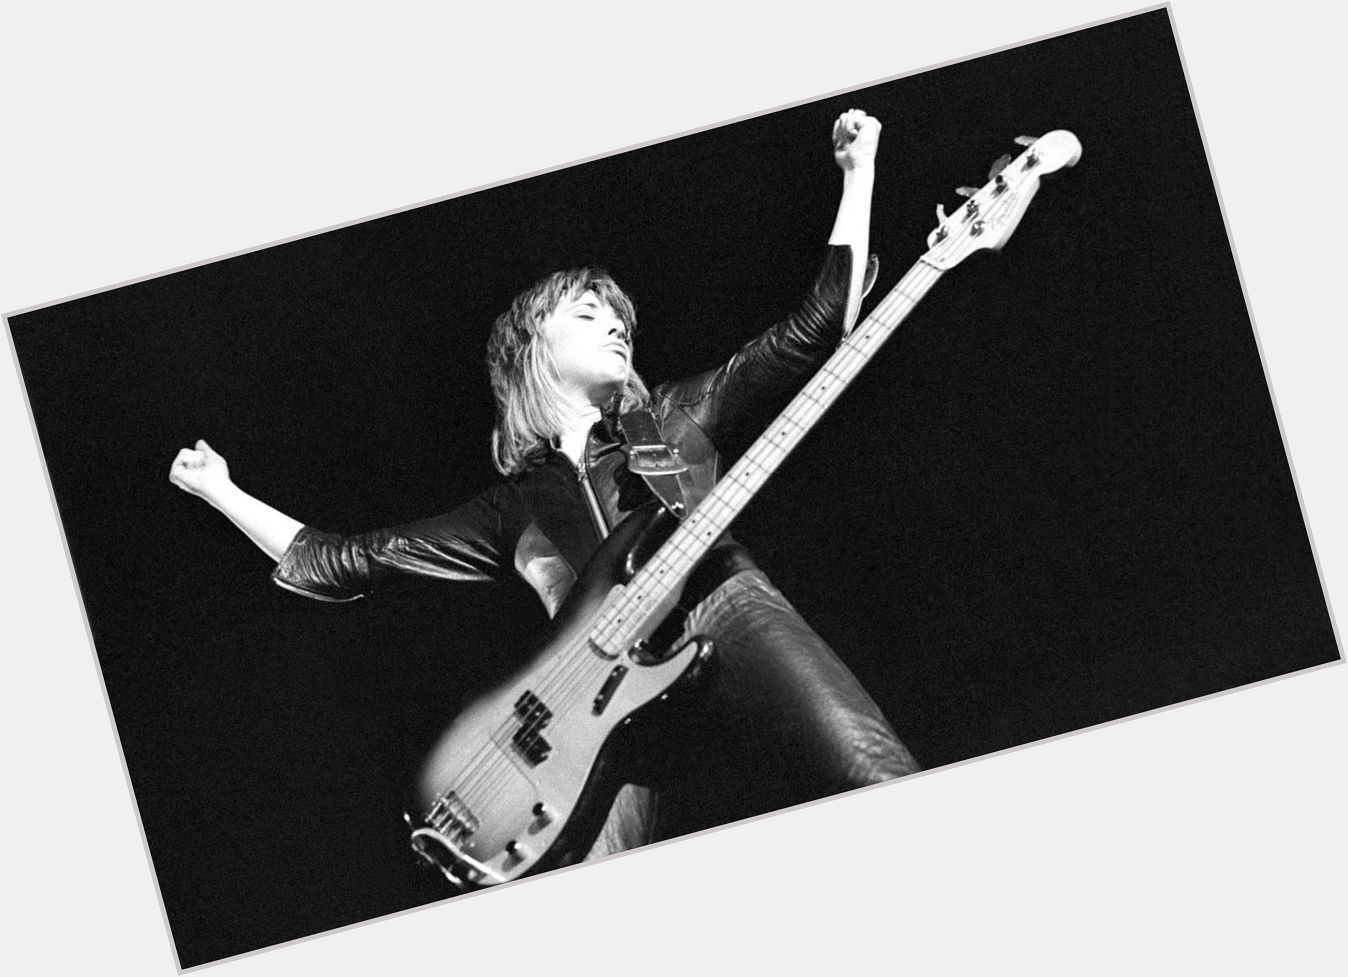 Some great releases and a momentous birthday on June 4. Happy birthday to the one and only Suzi Quatro! 